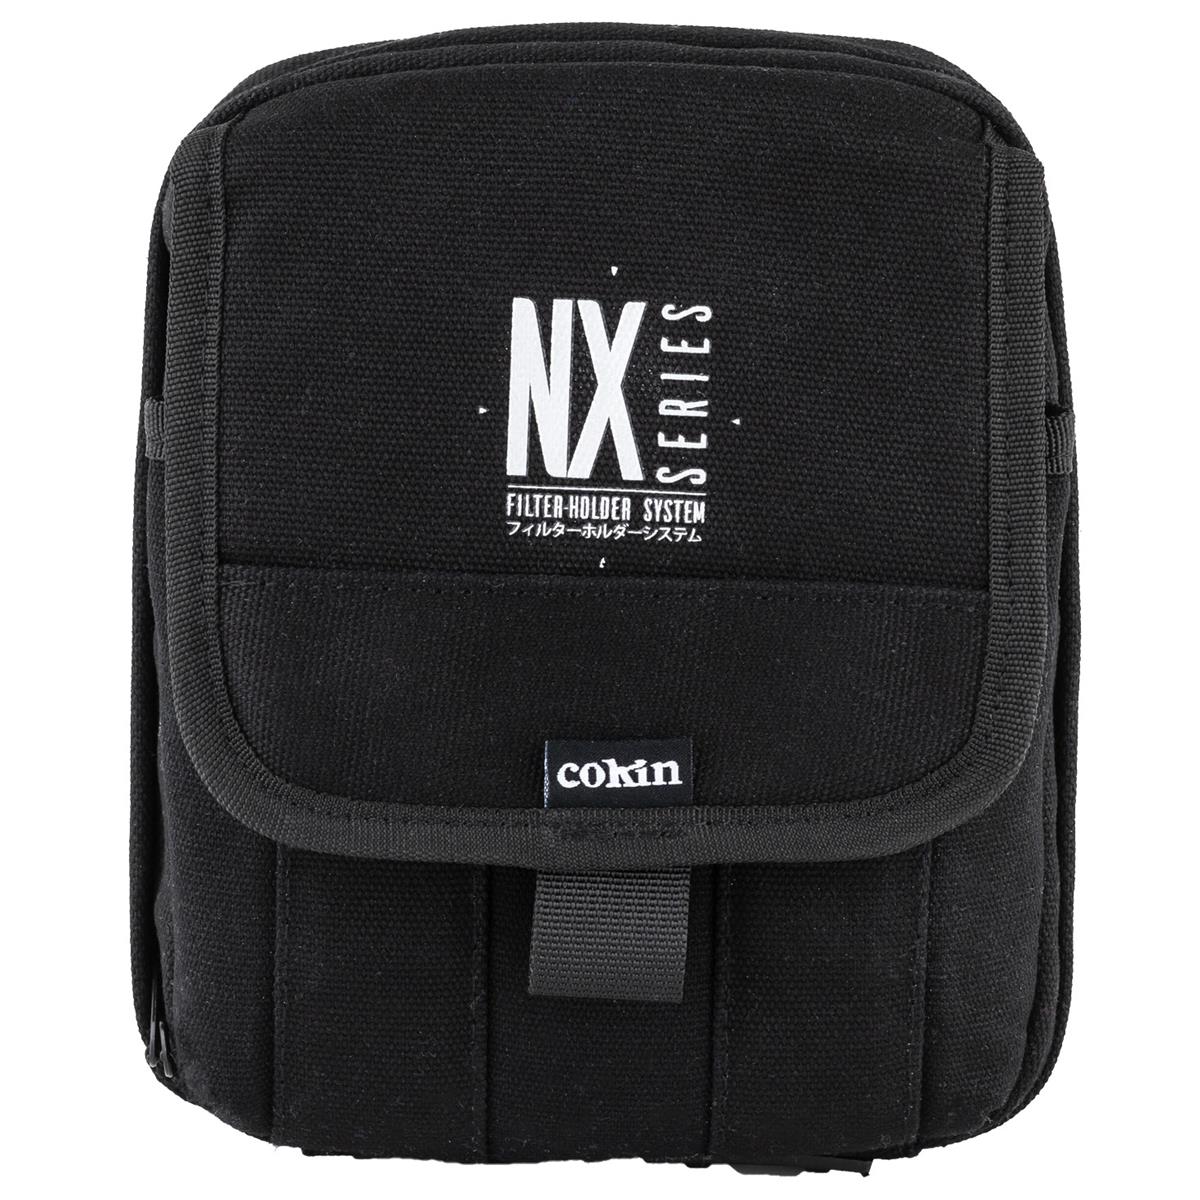 Photos - Other for studios Cokin NX Carry Case WA01NXS 